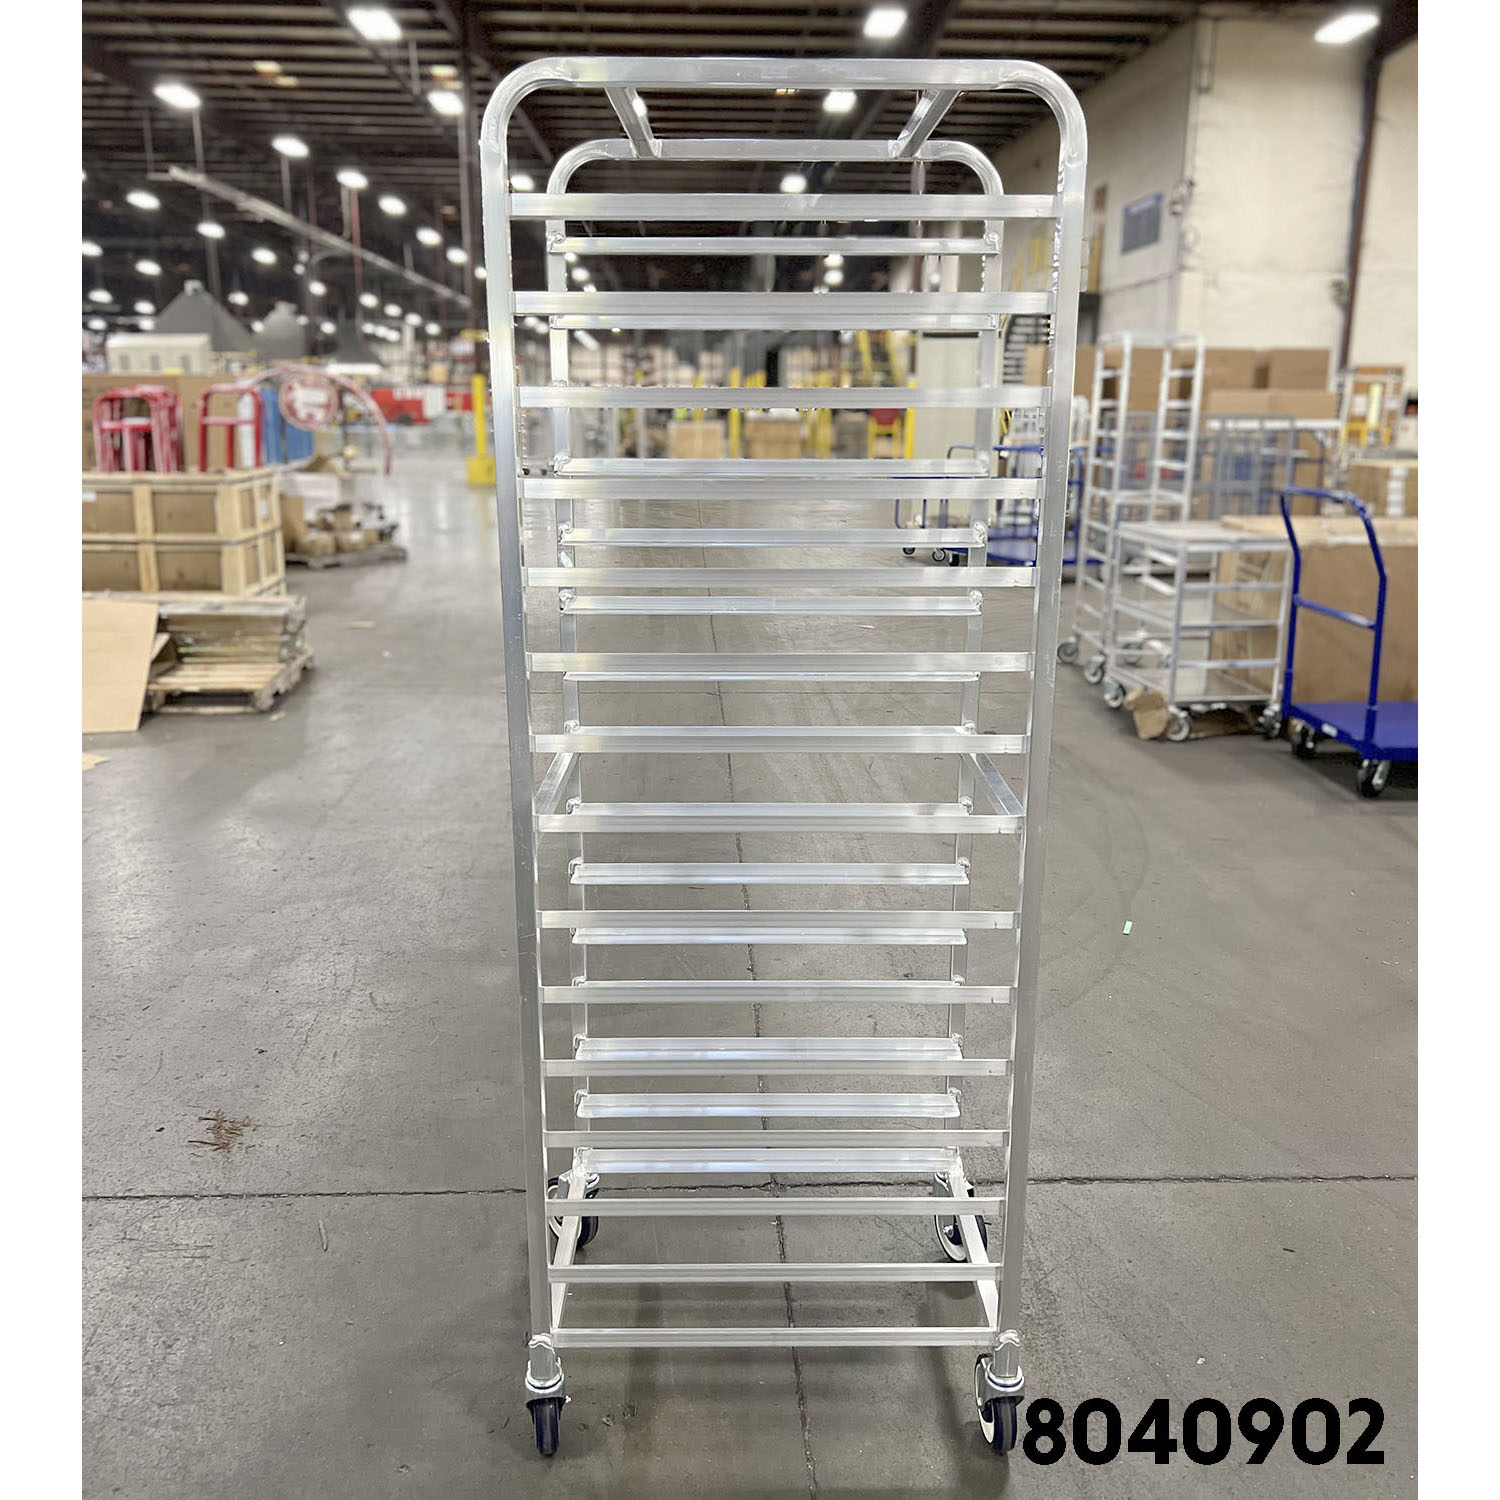 Aluminum End Loading Pan Racks NSF certification bakery cart kitchen cart restaurant cart grocery cart industrial cart nesting picking cart NSF cart NSF rack NSF approved NSF certified National Sanitation Foundation tray shelf Distribution Cart picking cart tray shelf picking cart, picking cart, ecom cart, ecommerce cart, ecommerce picking cart, picking cart, INDUSTRIAL CARTS, grocery cart grocery picking cart, department store cart, beverage cart NSF approved. This food service cart meets strict standards and procedures imposed by NSF. lug cart meat department, produce department bakery cart bakery rack bakery carts bakery racks meat rack meat cart sushi cart salad bar cart deli cart stream table cart buffet cart